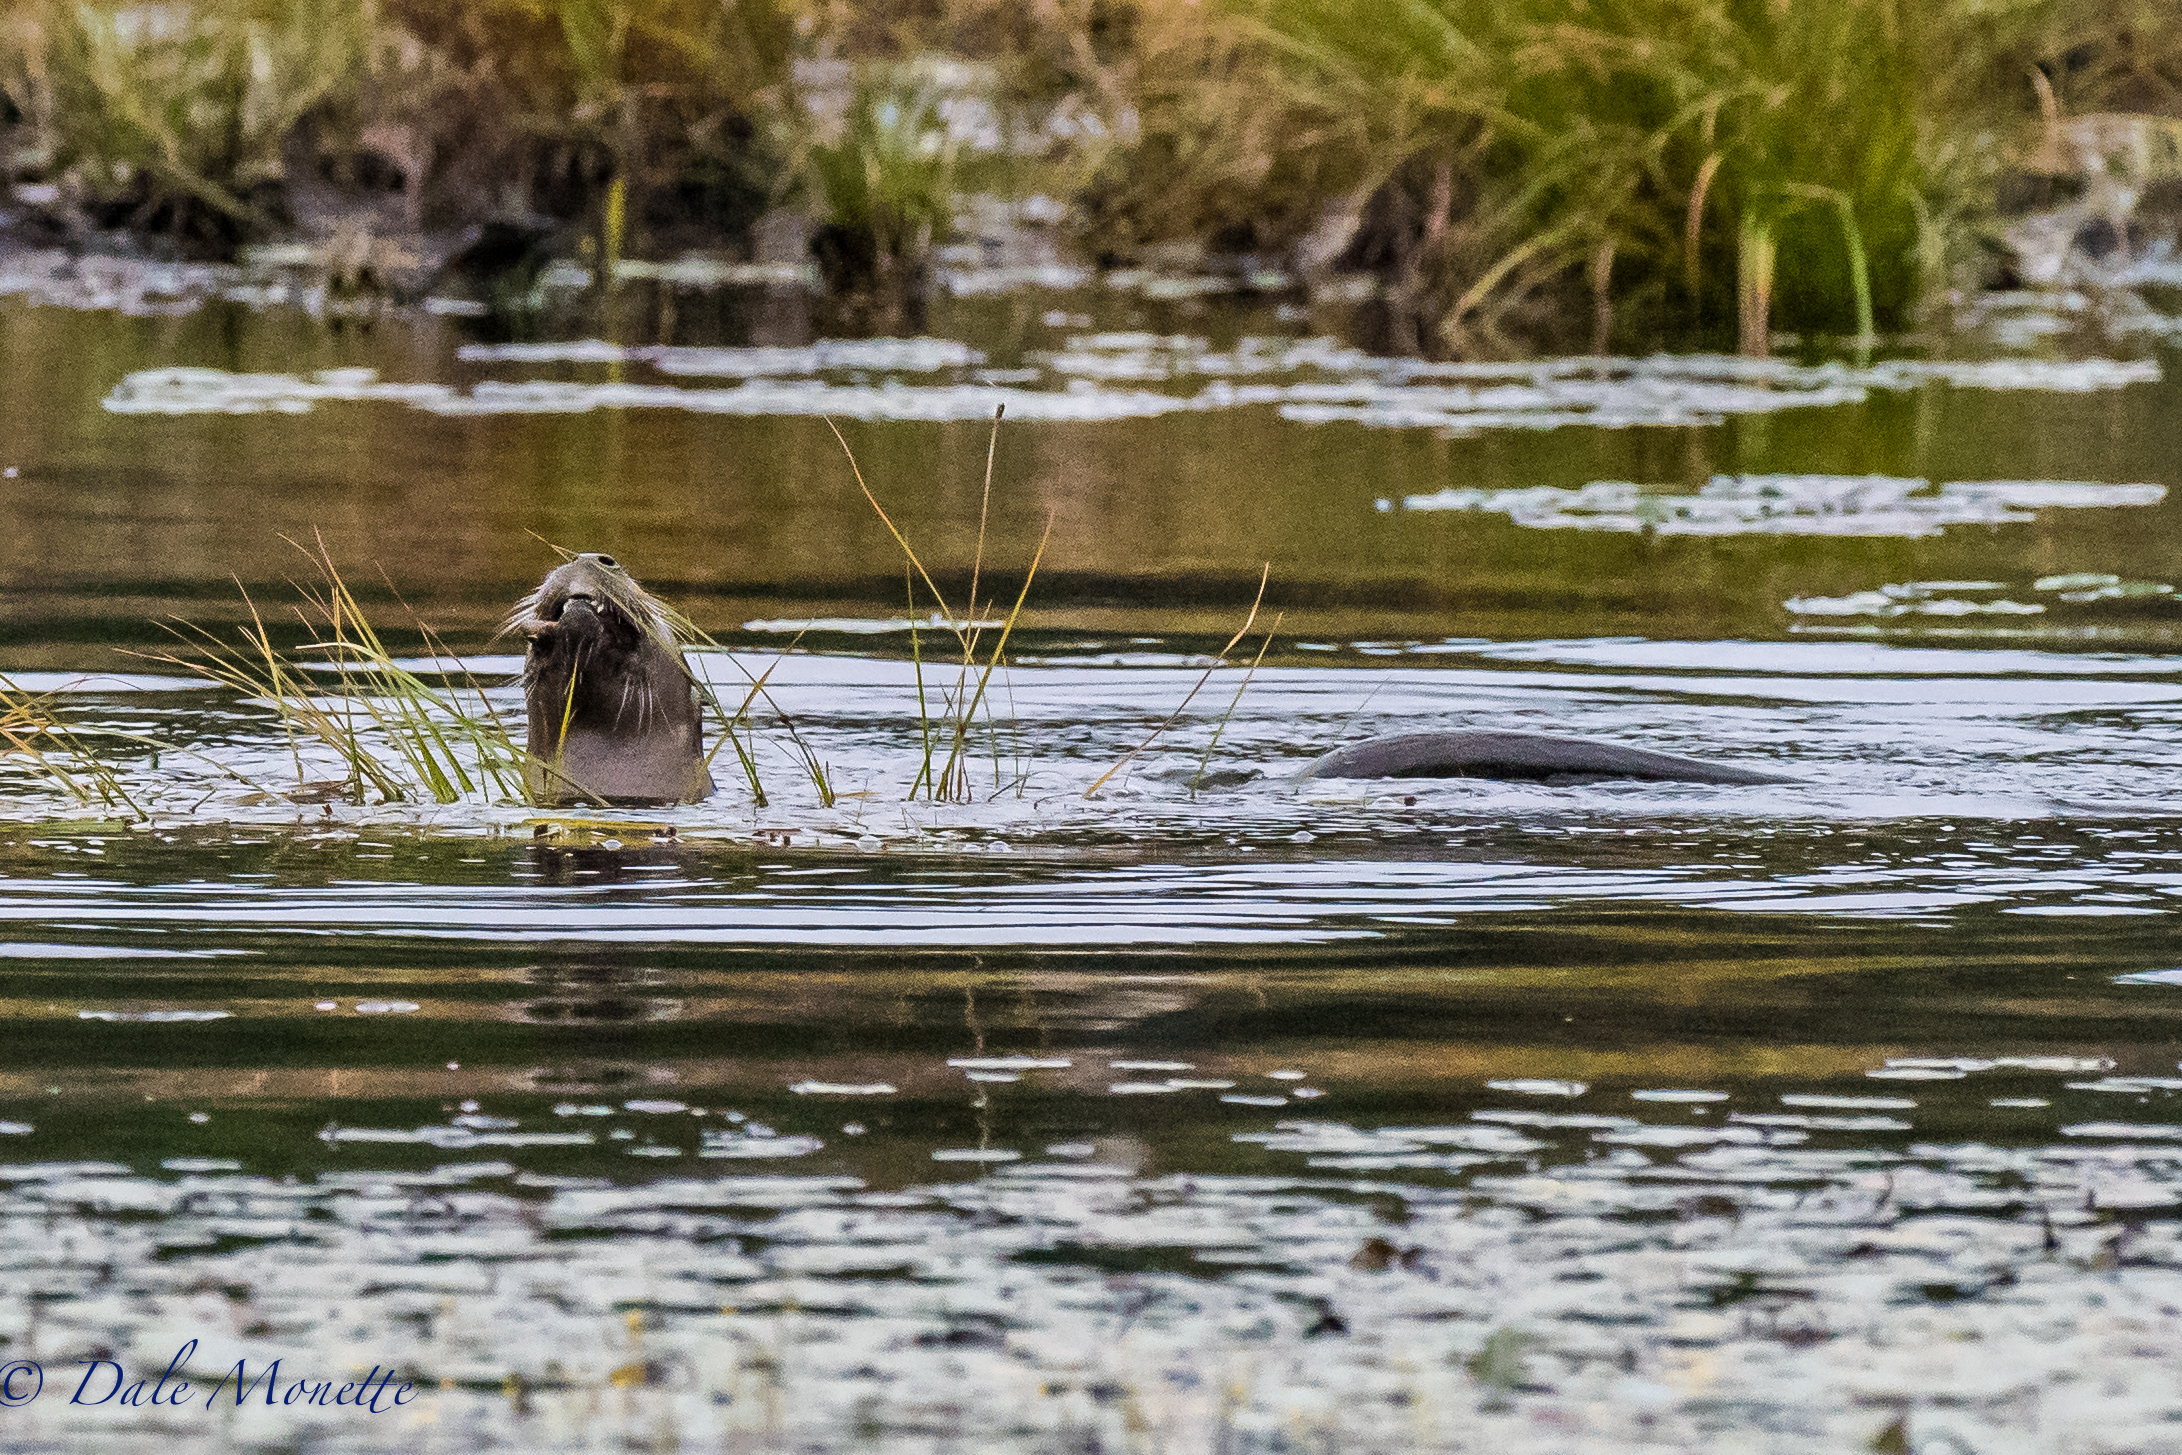   It was cold and whipping winds this morning but this young river otter didn't seem to care as long as he had fish to catch ! &nbsp;9/30/16  